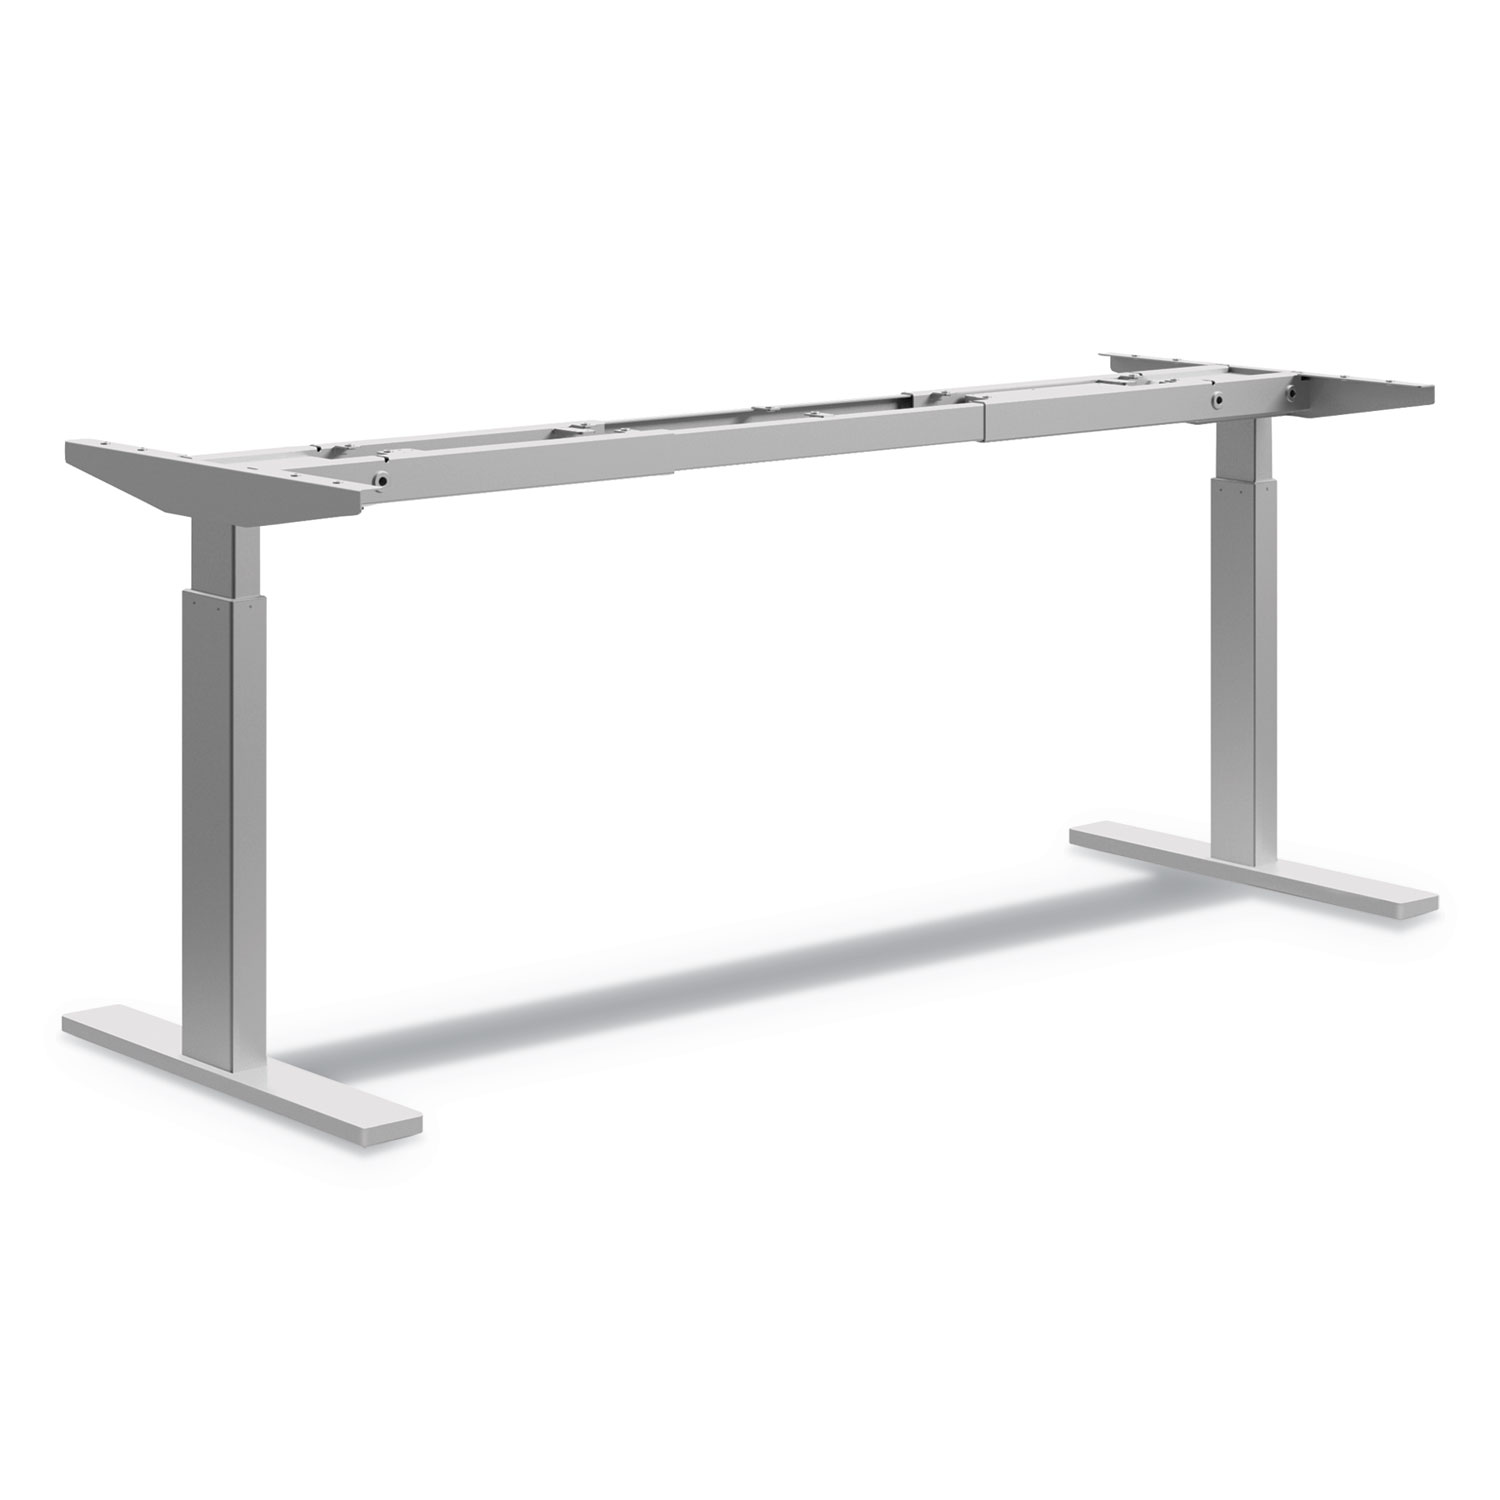  HON HHAB2S2L.P8L Coordinate Height-Adjustable Base, 72 h x 24 d x 25.5 to 45.25 h, Nickel (HONHAB2S2LP8L) 